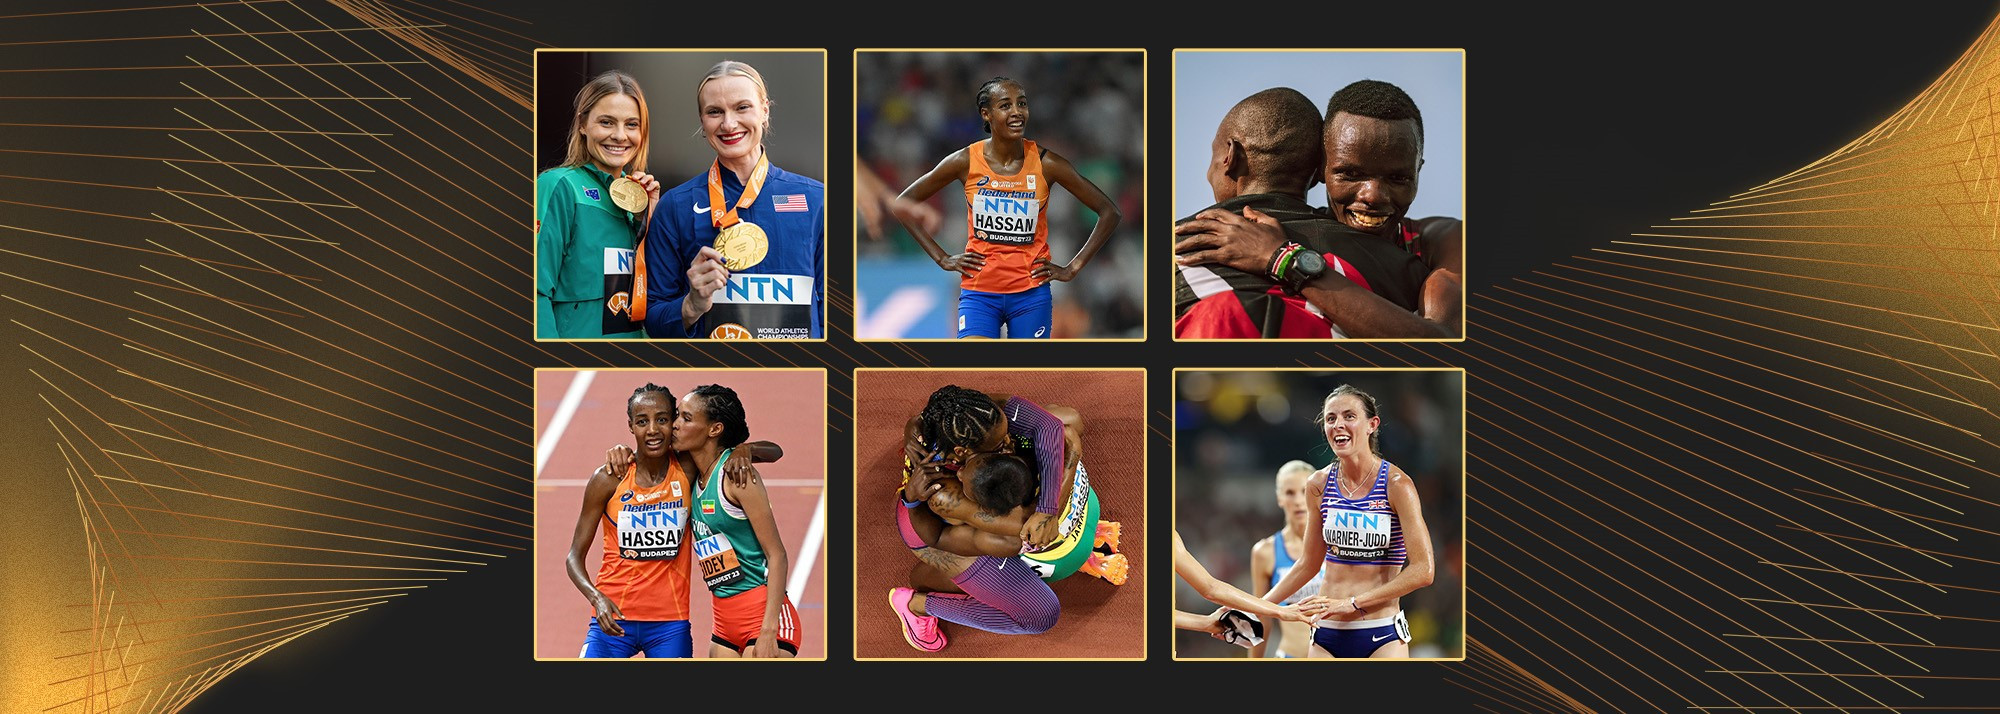 A shortlist of six athletics moments have been shortlisted for the International Fair Play Award ©World Athletics